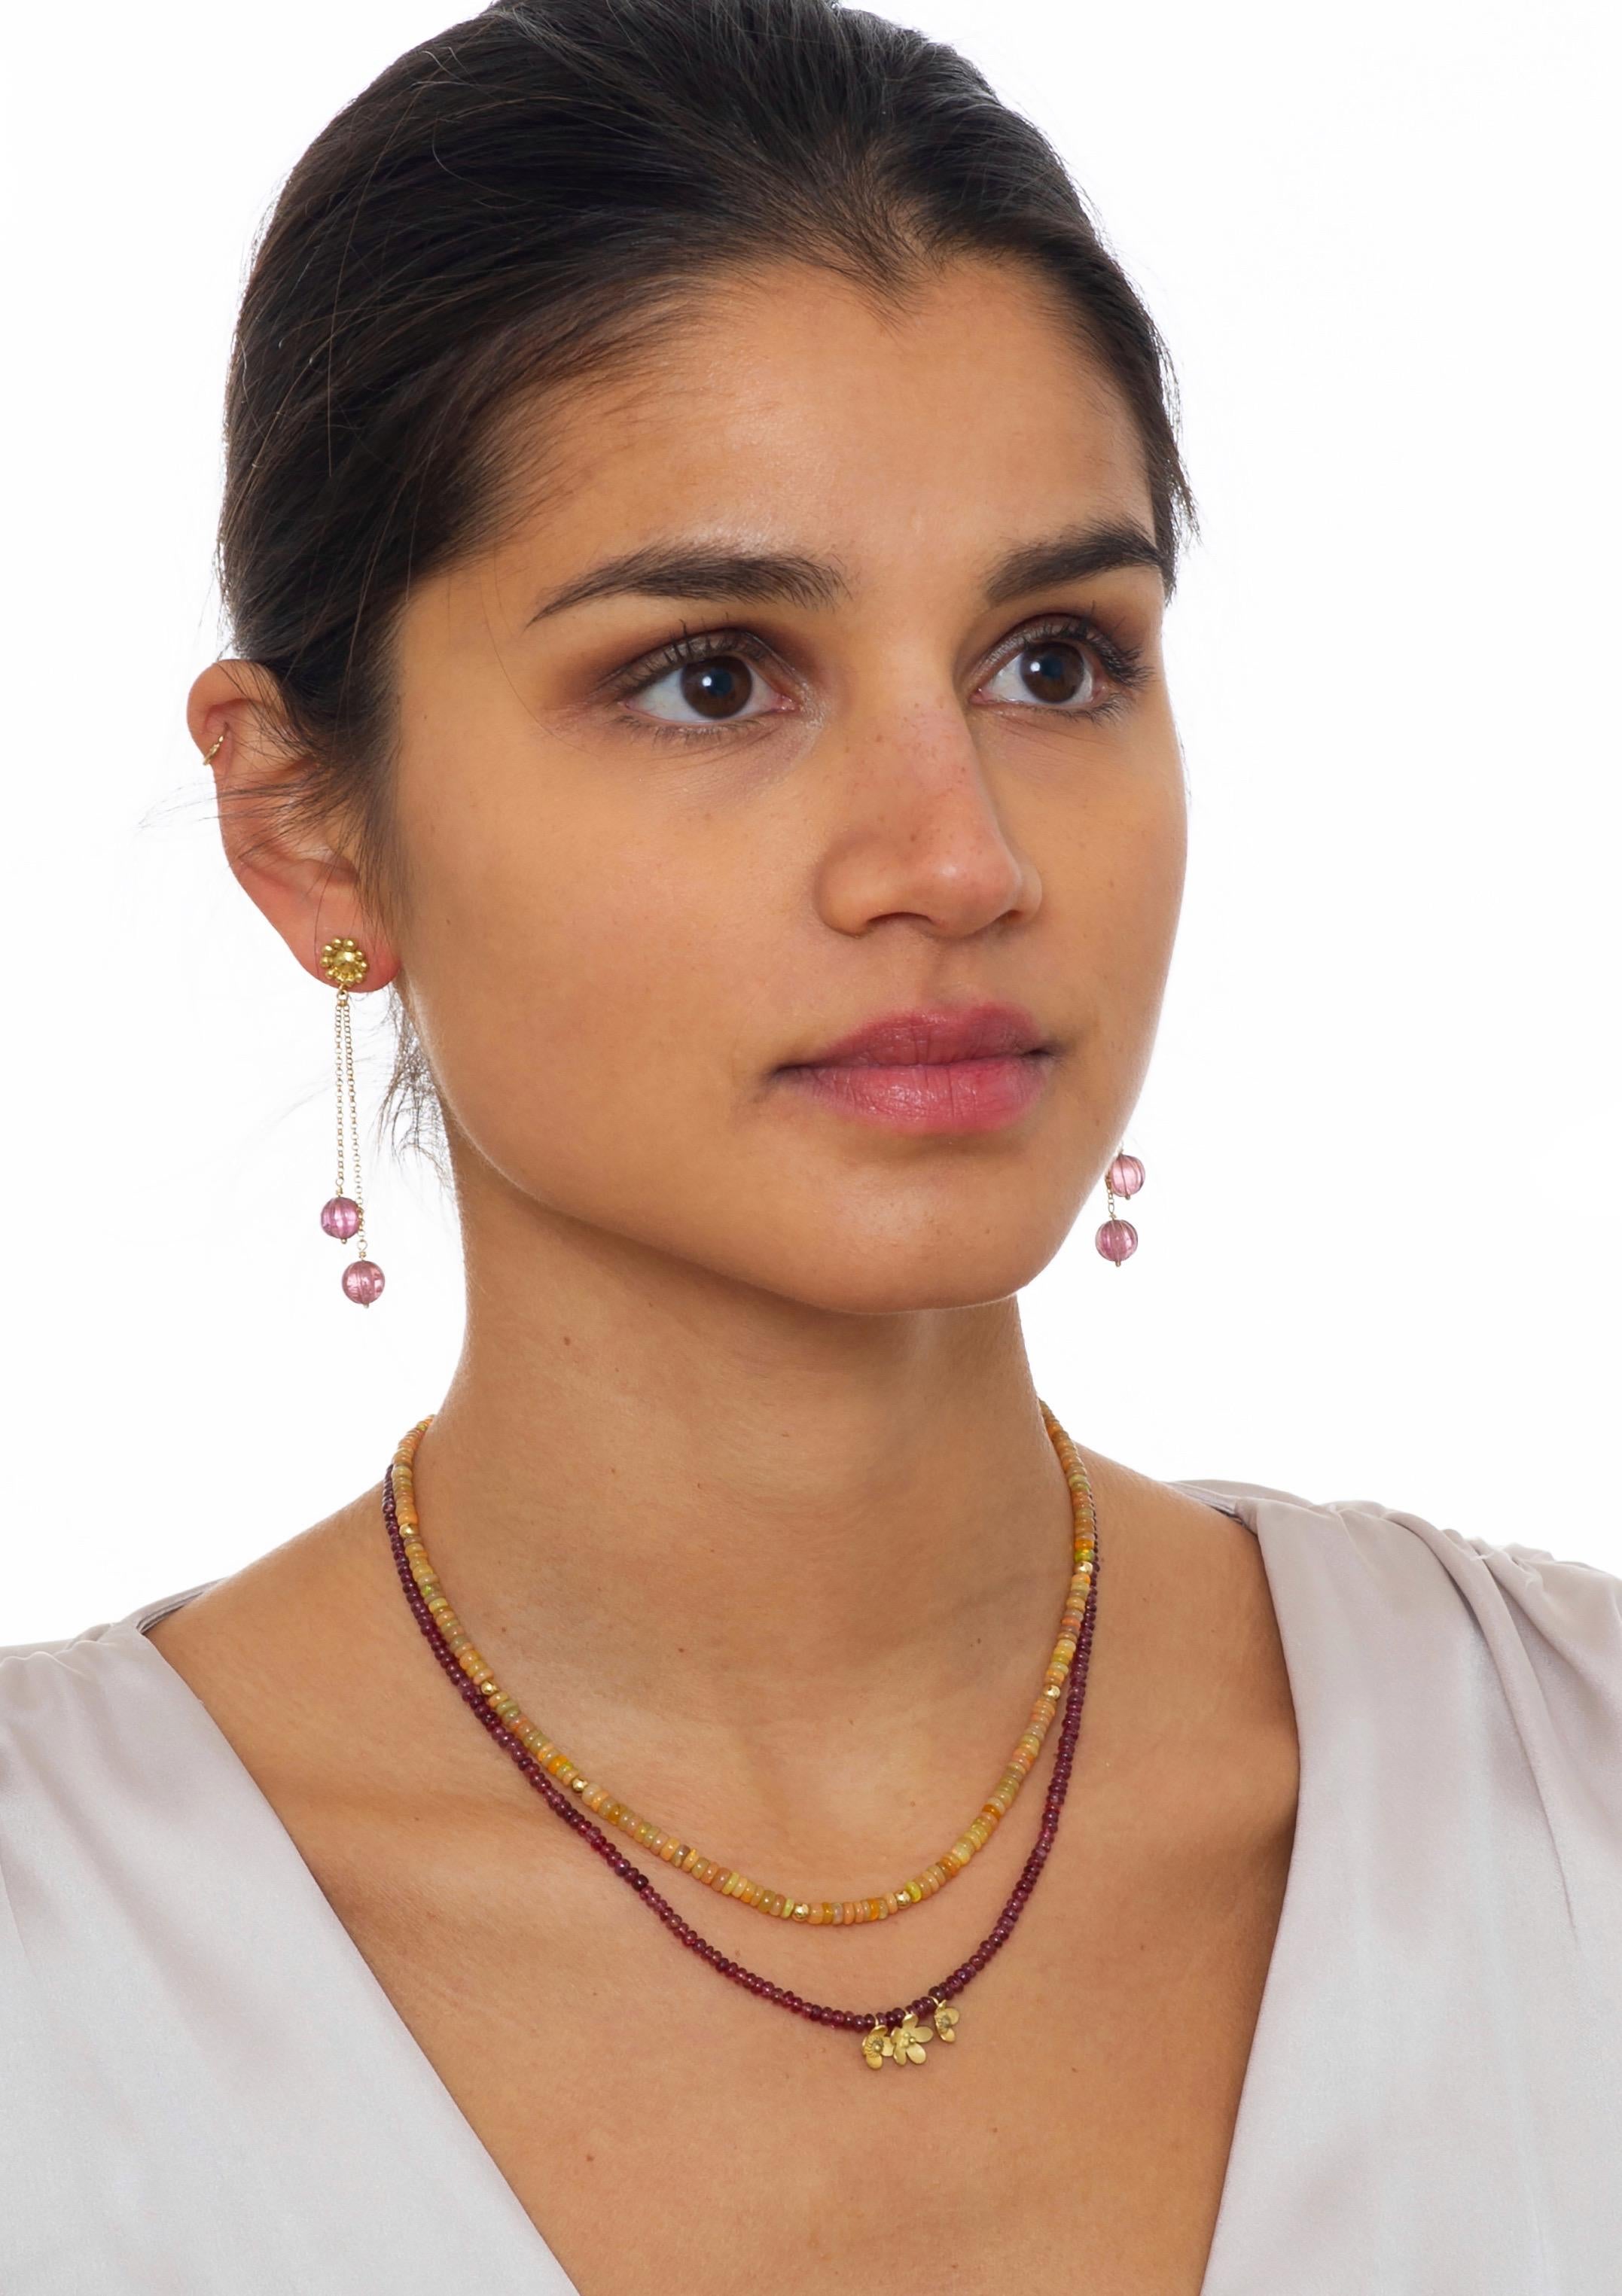 18k Gold short necklace of smooth pink spinel beads and handmade dainty little gold flower charms. 
A versatile and colourful addition to any jewelry wardrobe in any season. The shorter length makes it a great option for stacking with other styles.